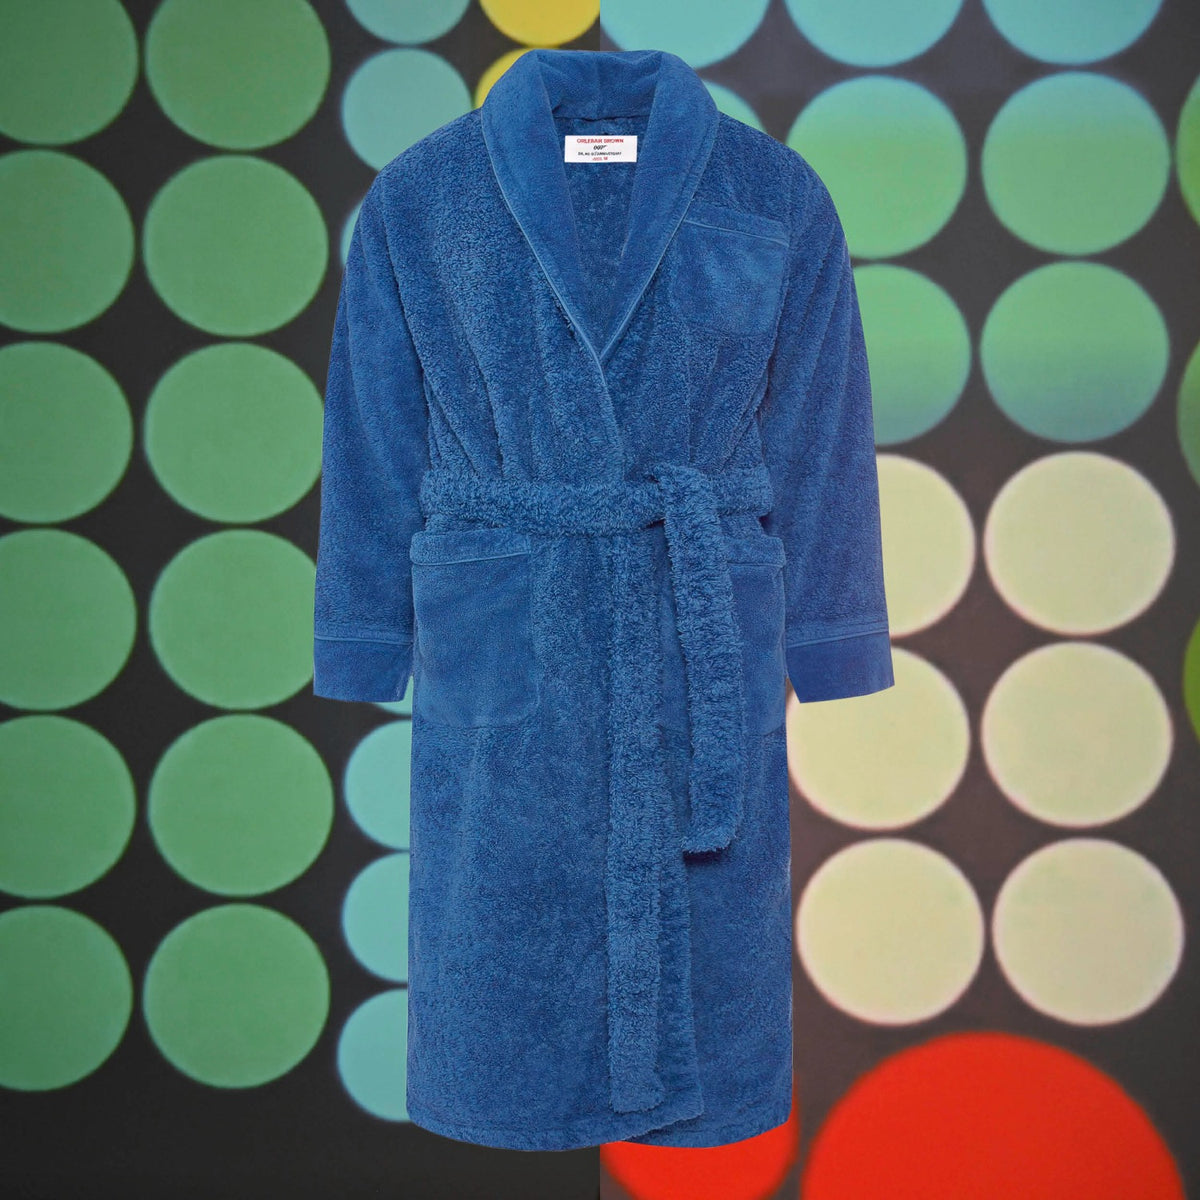 James Bond Mid Blue Dr. No Towelling Robe - By Orlebar Brown